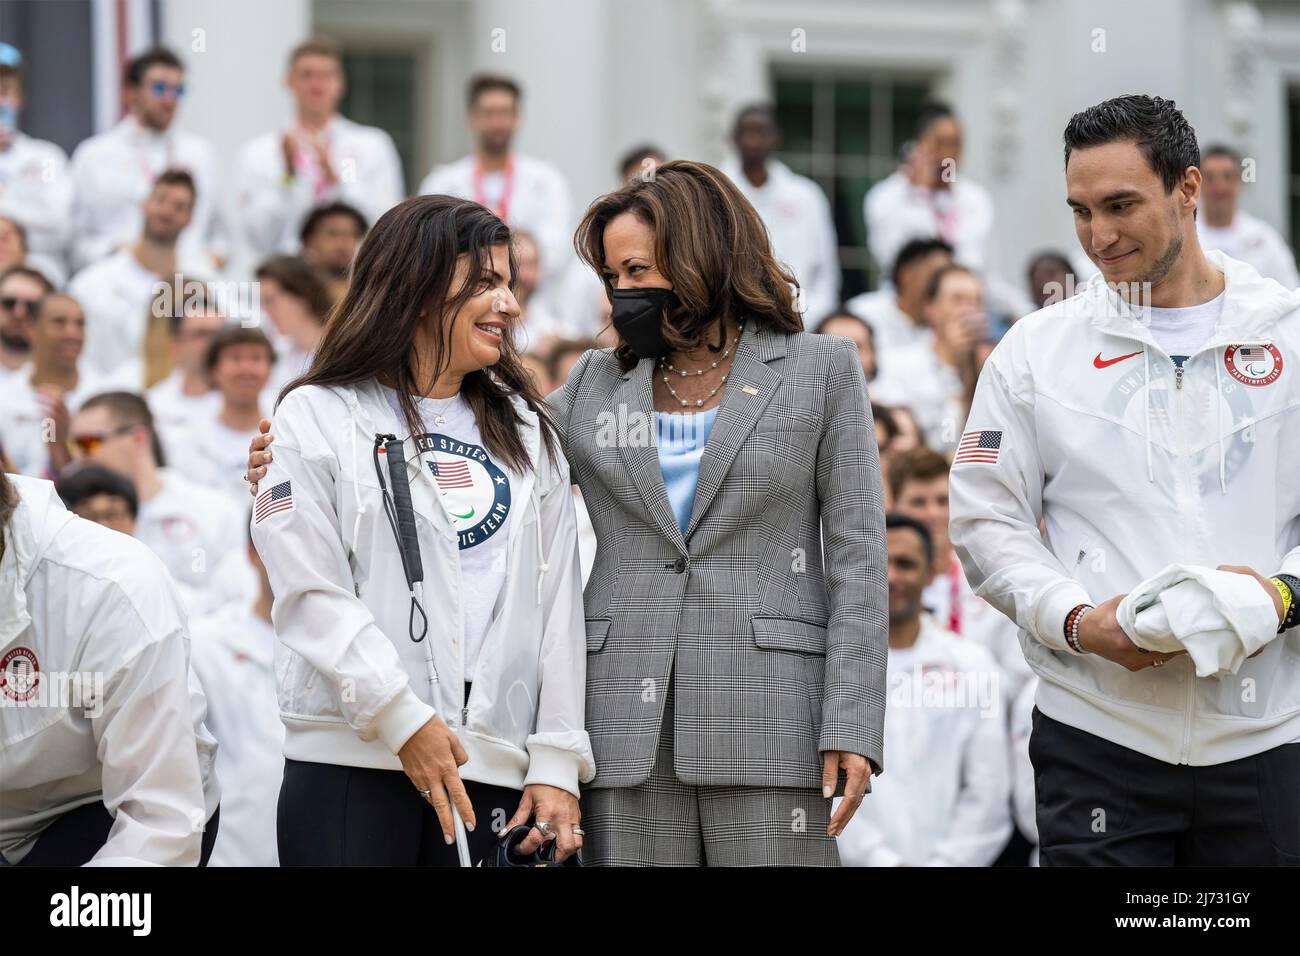 Washington, United States of America. 04 May, 2022. U.S Vice President Kamala Harris, center, poses with Paralympic gold medalist Anastasia Pagonis, left, during an event welcoming the athletes that participated in the Tokyo 2020 Summer Olympic and Paralympics, Beijing 2022 Winter Olympic and Paralympics, on the South Lawn of the White House, May 4, 2022 in Washington, D.C.  Credit: Lawrence Jackson/White House Photo/Alamy Live News Stock Photo